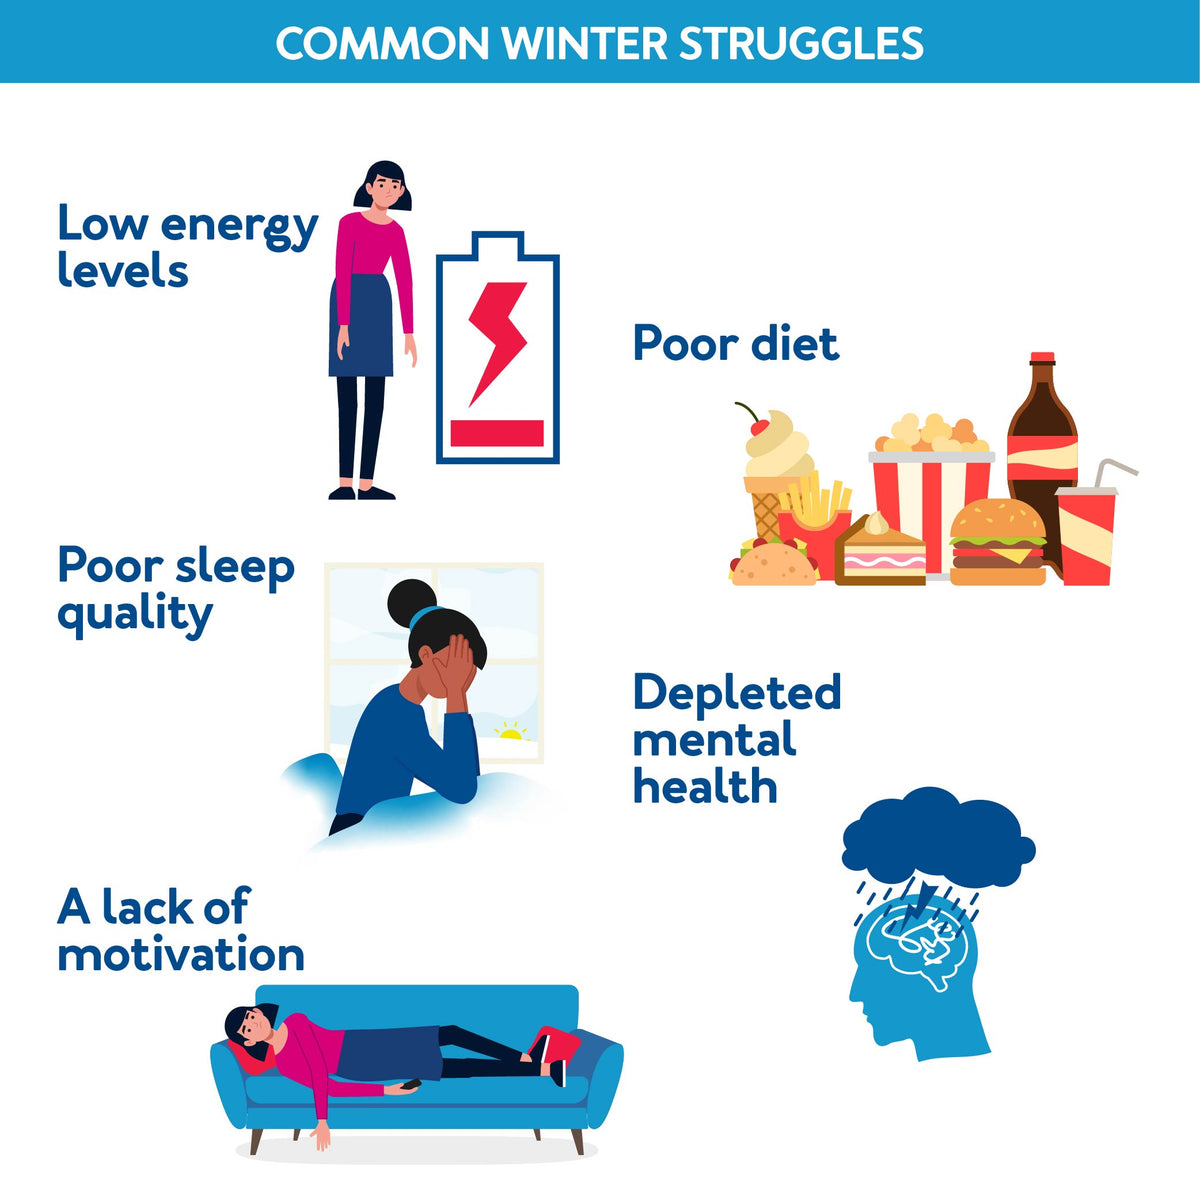 Common Winter Struggles: Low Energy Levels, Poor Sleep Quality, A Lack of Motivation, Poor Diet, and Depleted Mental Health